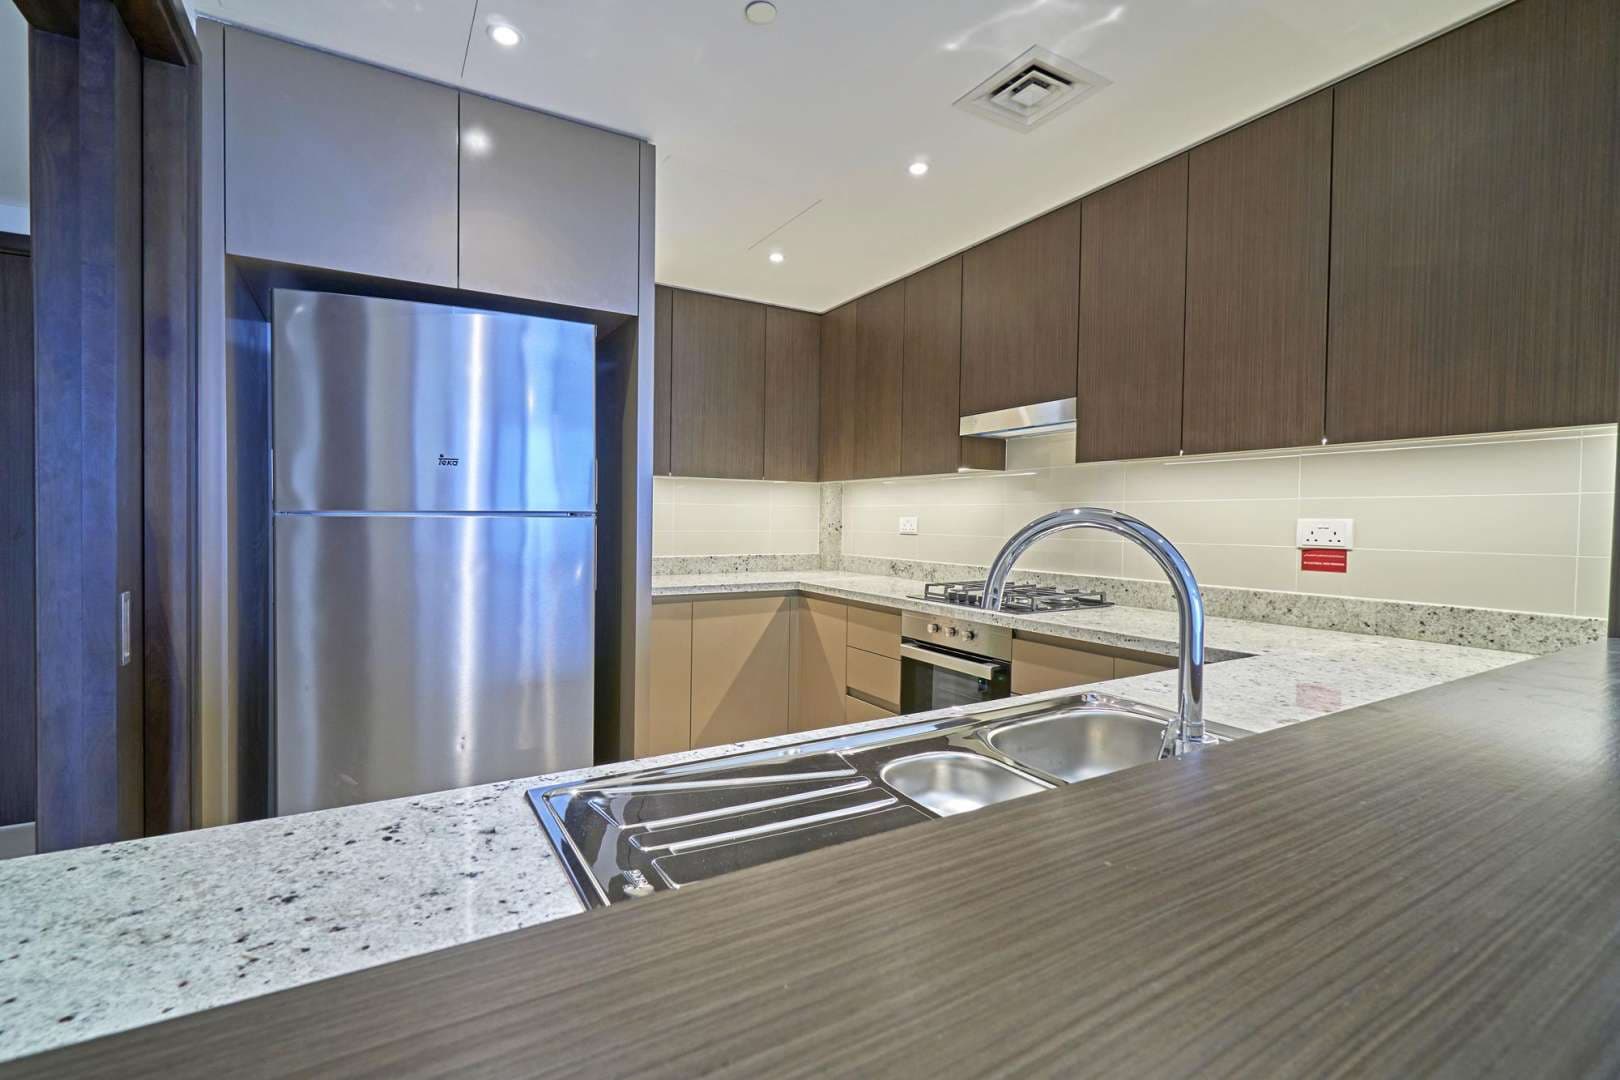 3 Bedroom Apartment For Sale Boulevard Heights Lp06560 235a5ca3802e1000.jpg